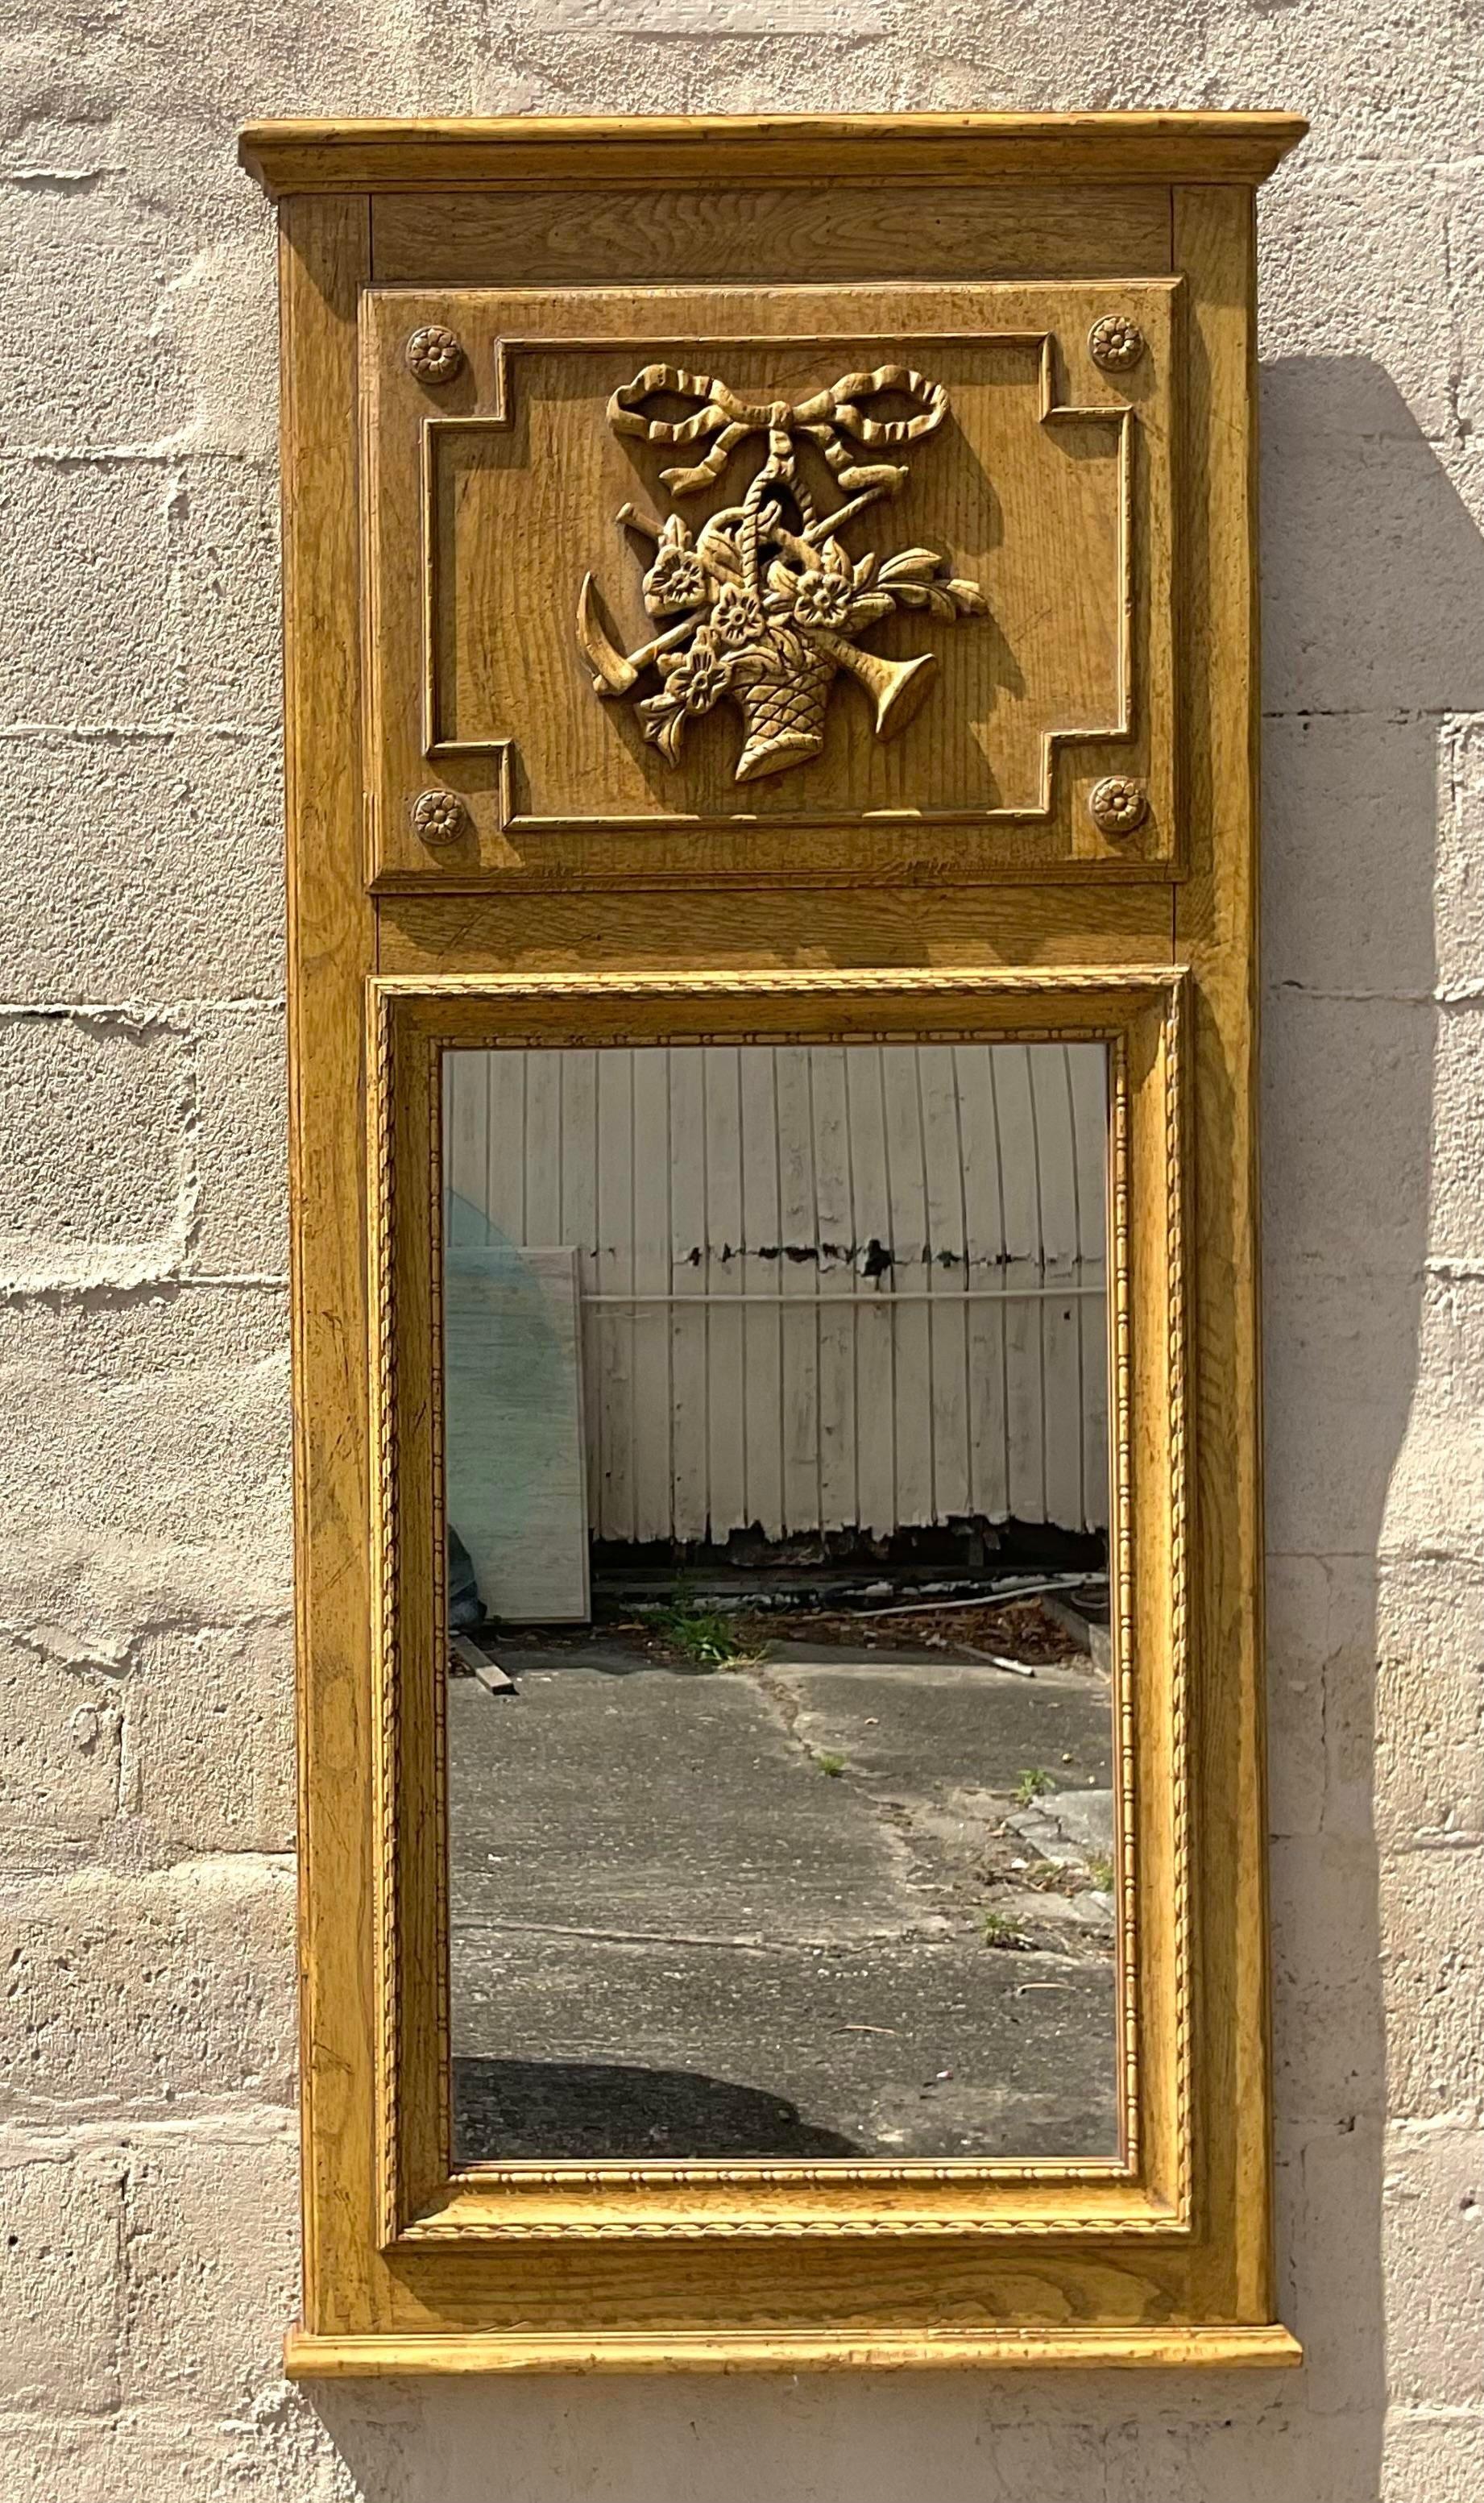 Add a touch of classic elegance with this Vintage Regency Baker trumeau mirror. Reflecting American Regency style at its finest, this mirror showcases exquisite craftsmanship and timeless design. A sophisticated accent piece that elevates any room